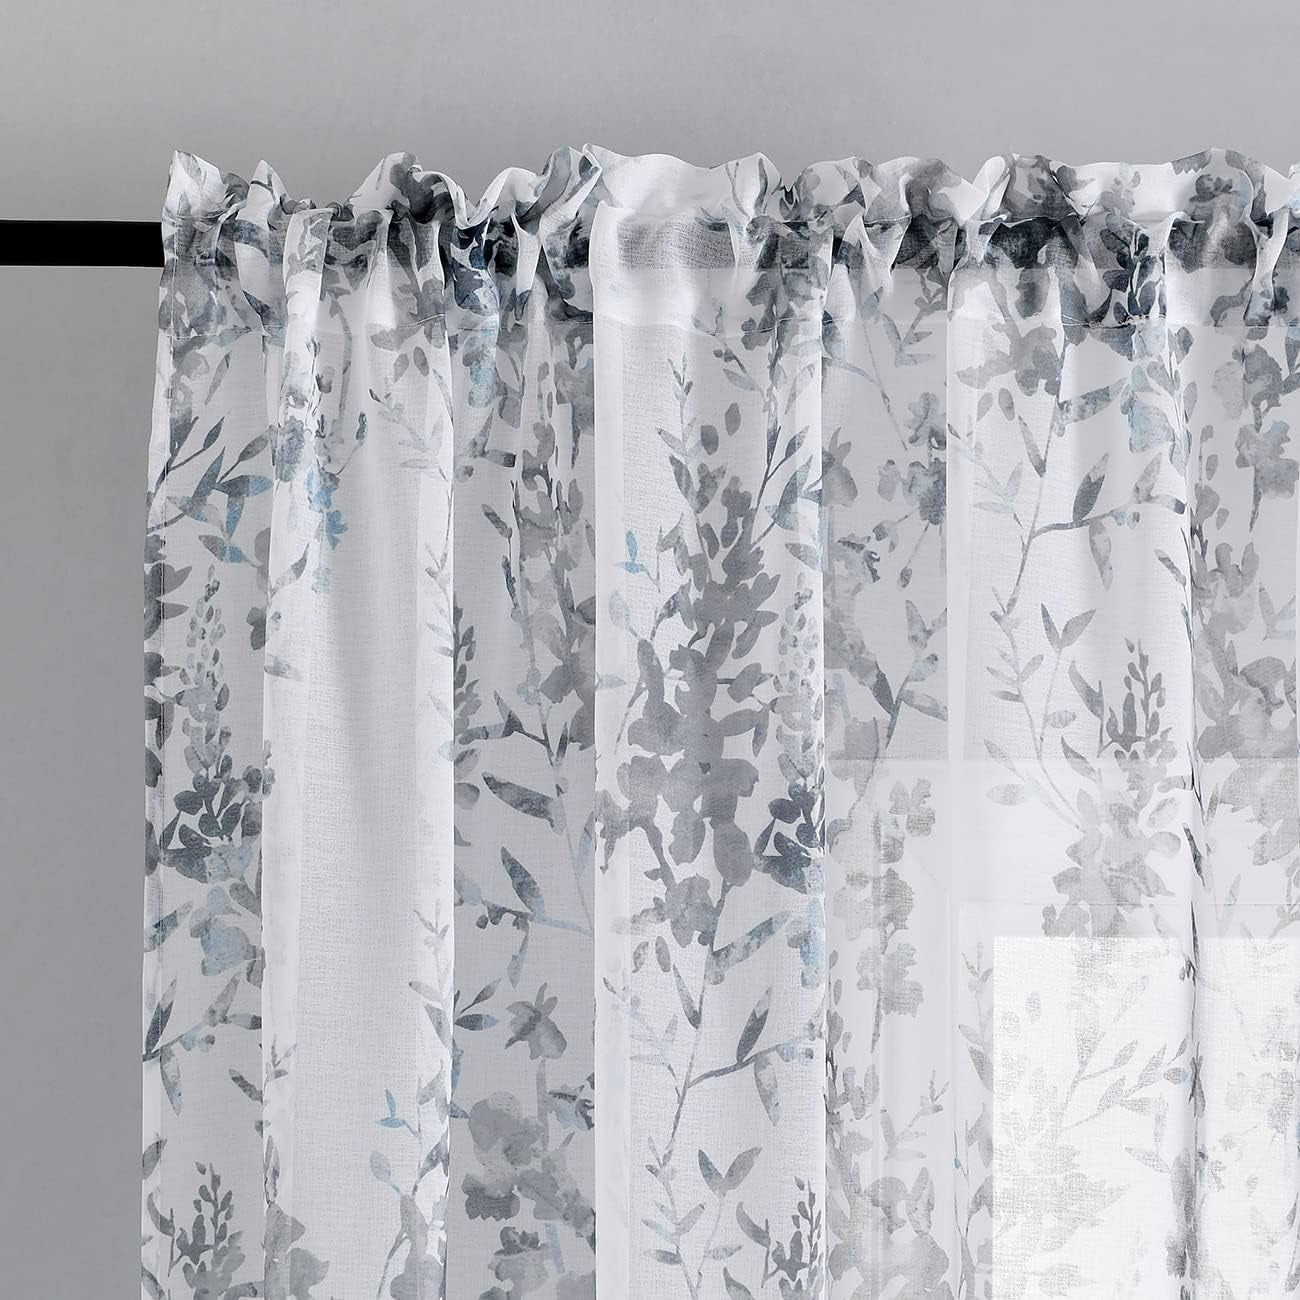 Kotile Grey White Sheer Curtains, Classic Vintage Branch Leaf Printed Sheer Curtains 63 Inch Length 2 Panels Set, Privacy Rod Pocket Sheer Window Floral Curtains, 50 X 63 Inch, Grey  Kotile Textile   